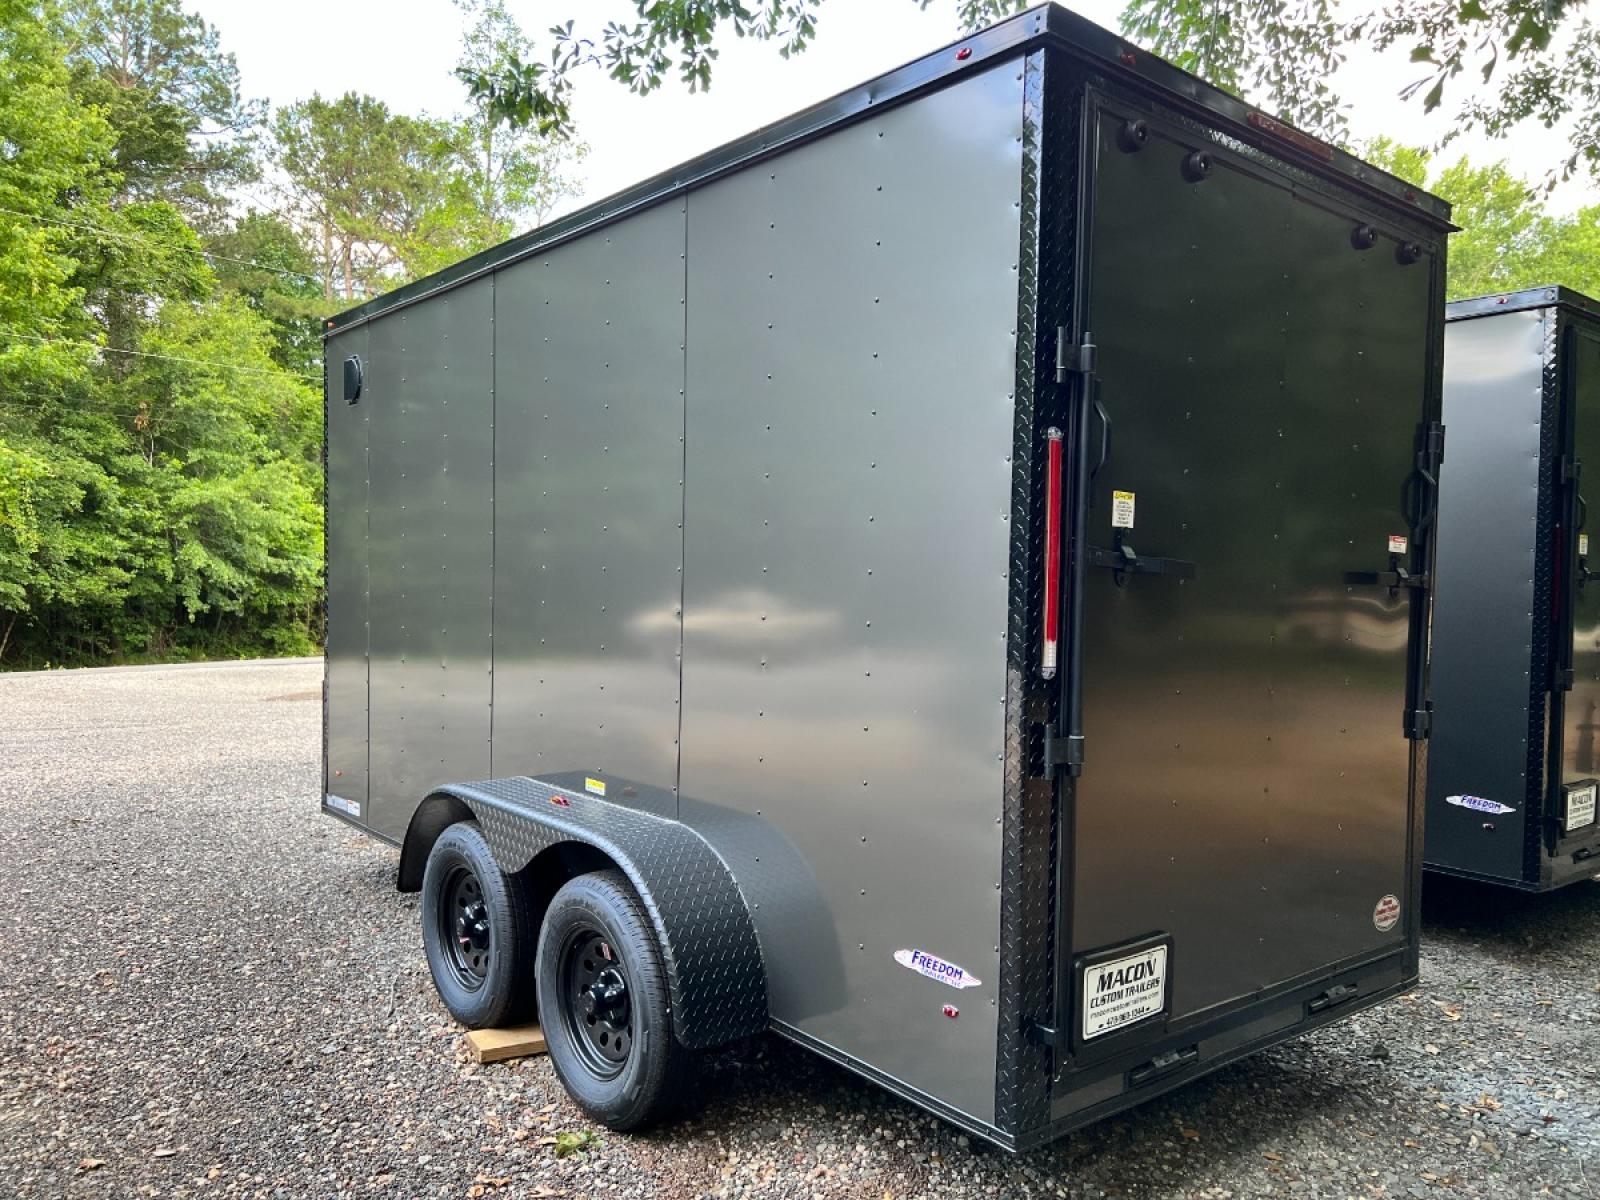 2023 Charcoal Metallic w/Black Out Pkg. Freedom Trailers 6ft X 14ft Tandem , located at 1330 Rainey Rd., Macon, 31220, (478) 960-1044, 32.845638, -83.778687 - Brand New 2023 "Top of the Line" Freedom Brand Trailer Made in South Ga. Compact Size, Great for Tools or Cycle's! Awesome 6ft X 14ft Tandem Enclosed Cycle Hauler & Cargo Trailer! Taller Inside Height is 7ft 2" Tall Inside & the Ramp Door Clearance is 6ft 8" at the Back! .080 Thick Metallic - Photo #6